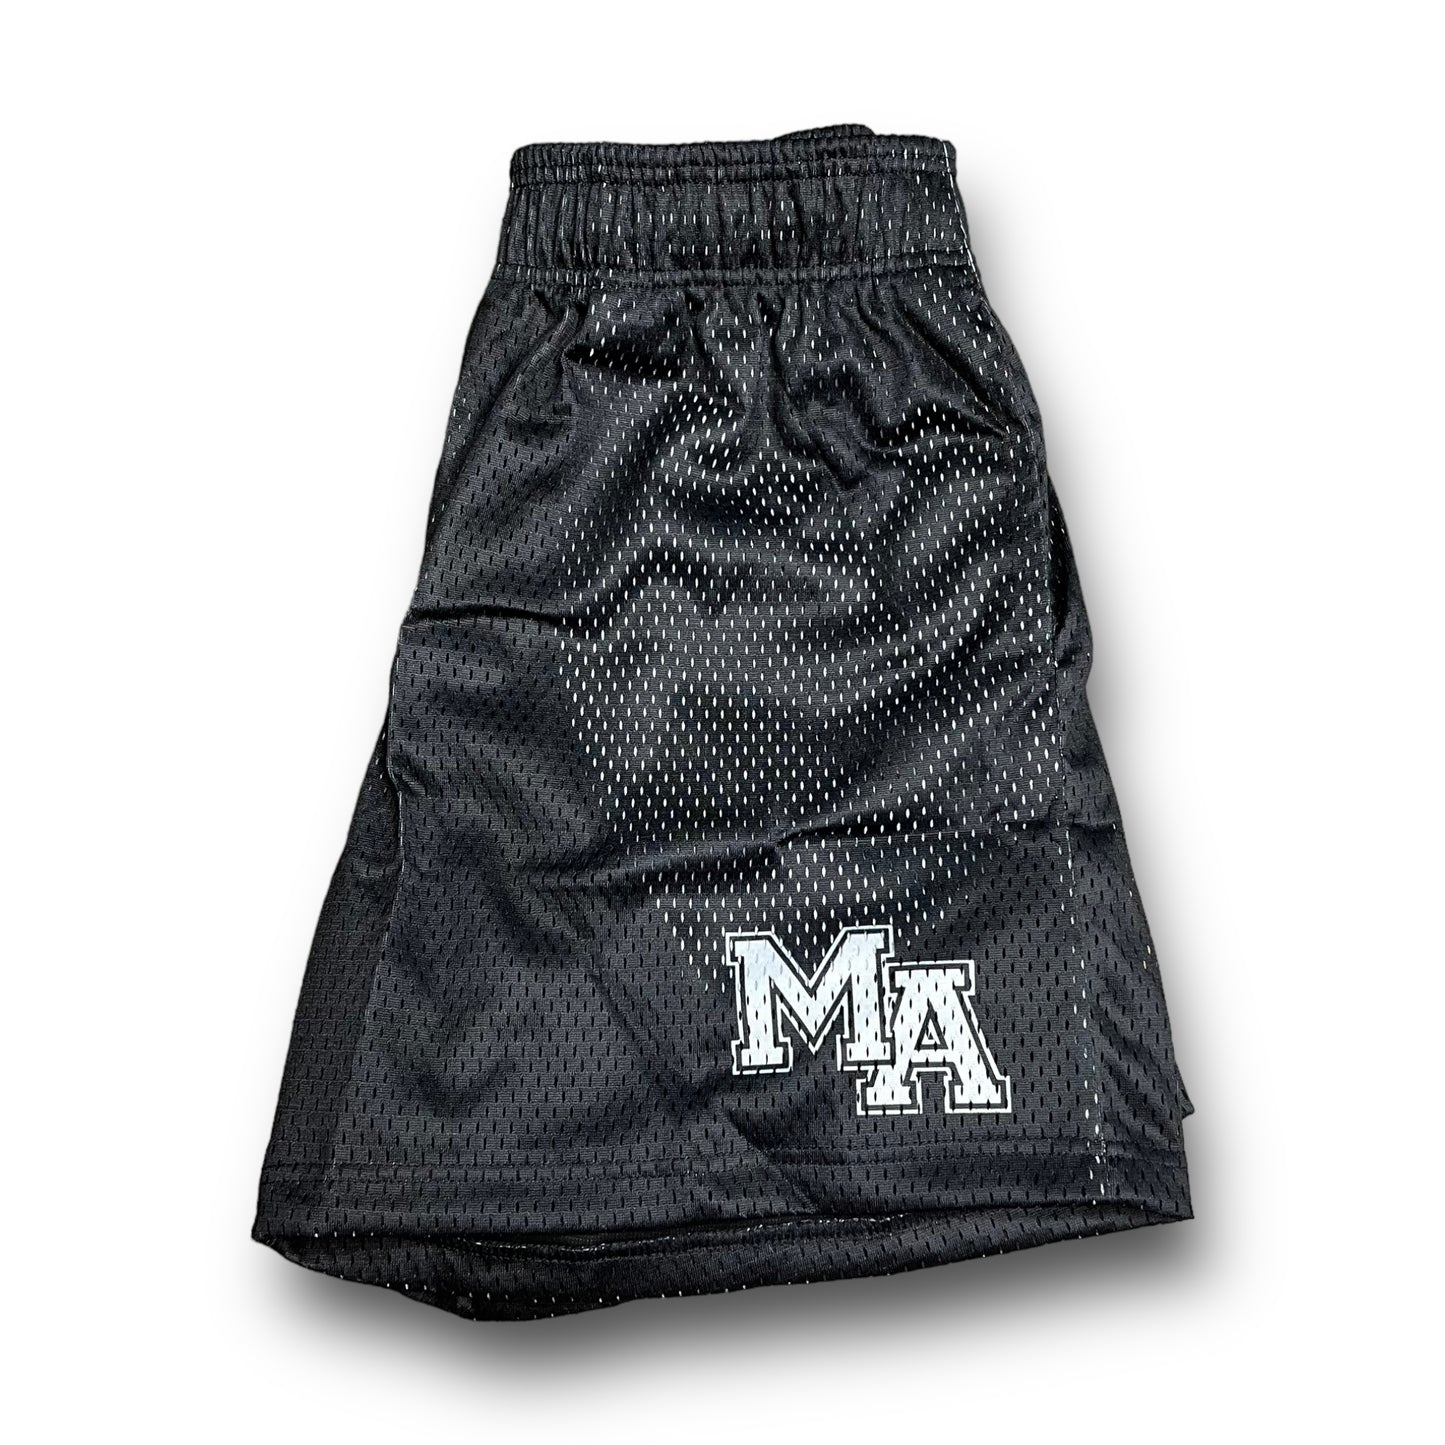 Misfitted Apparel Shorts - Black